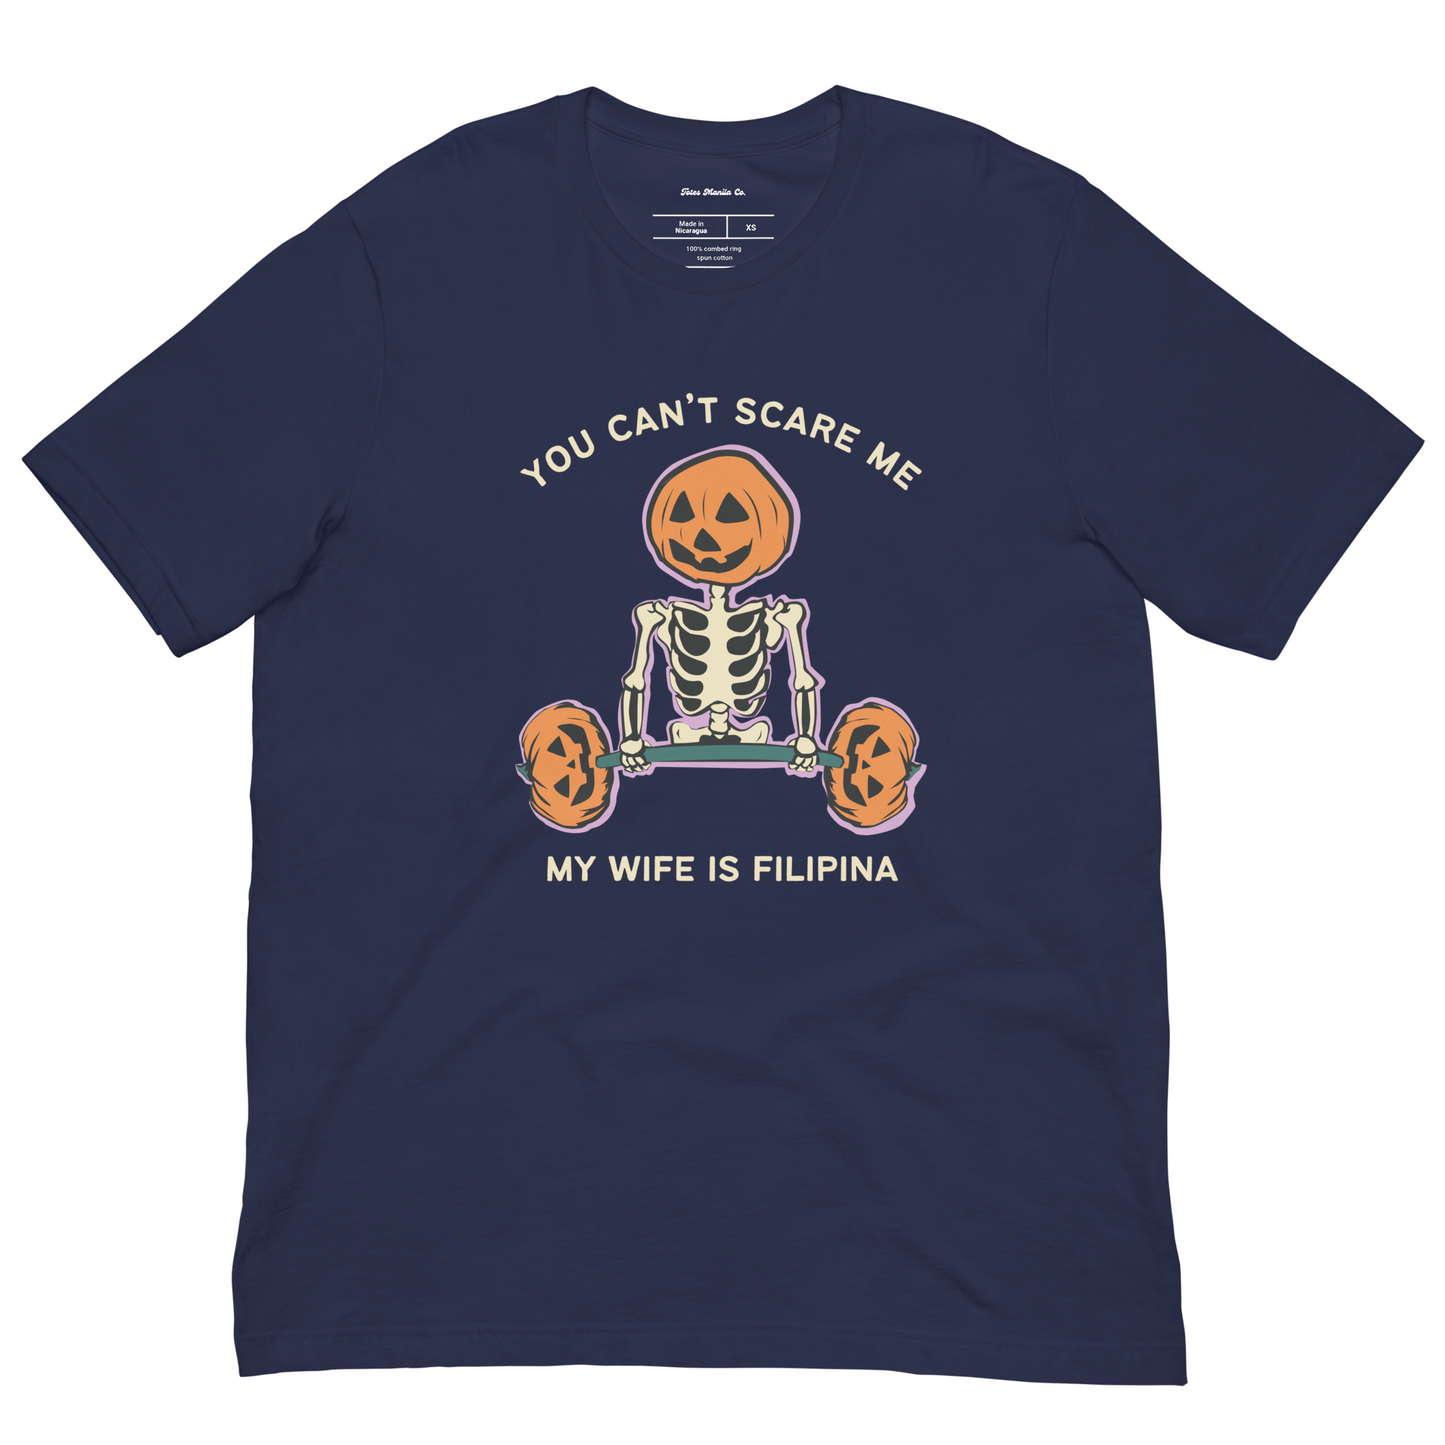 You Can't Scare Me My Wife Is Filipina Funny Halloween Shirt in Navy